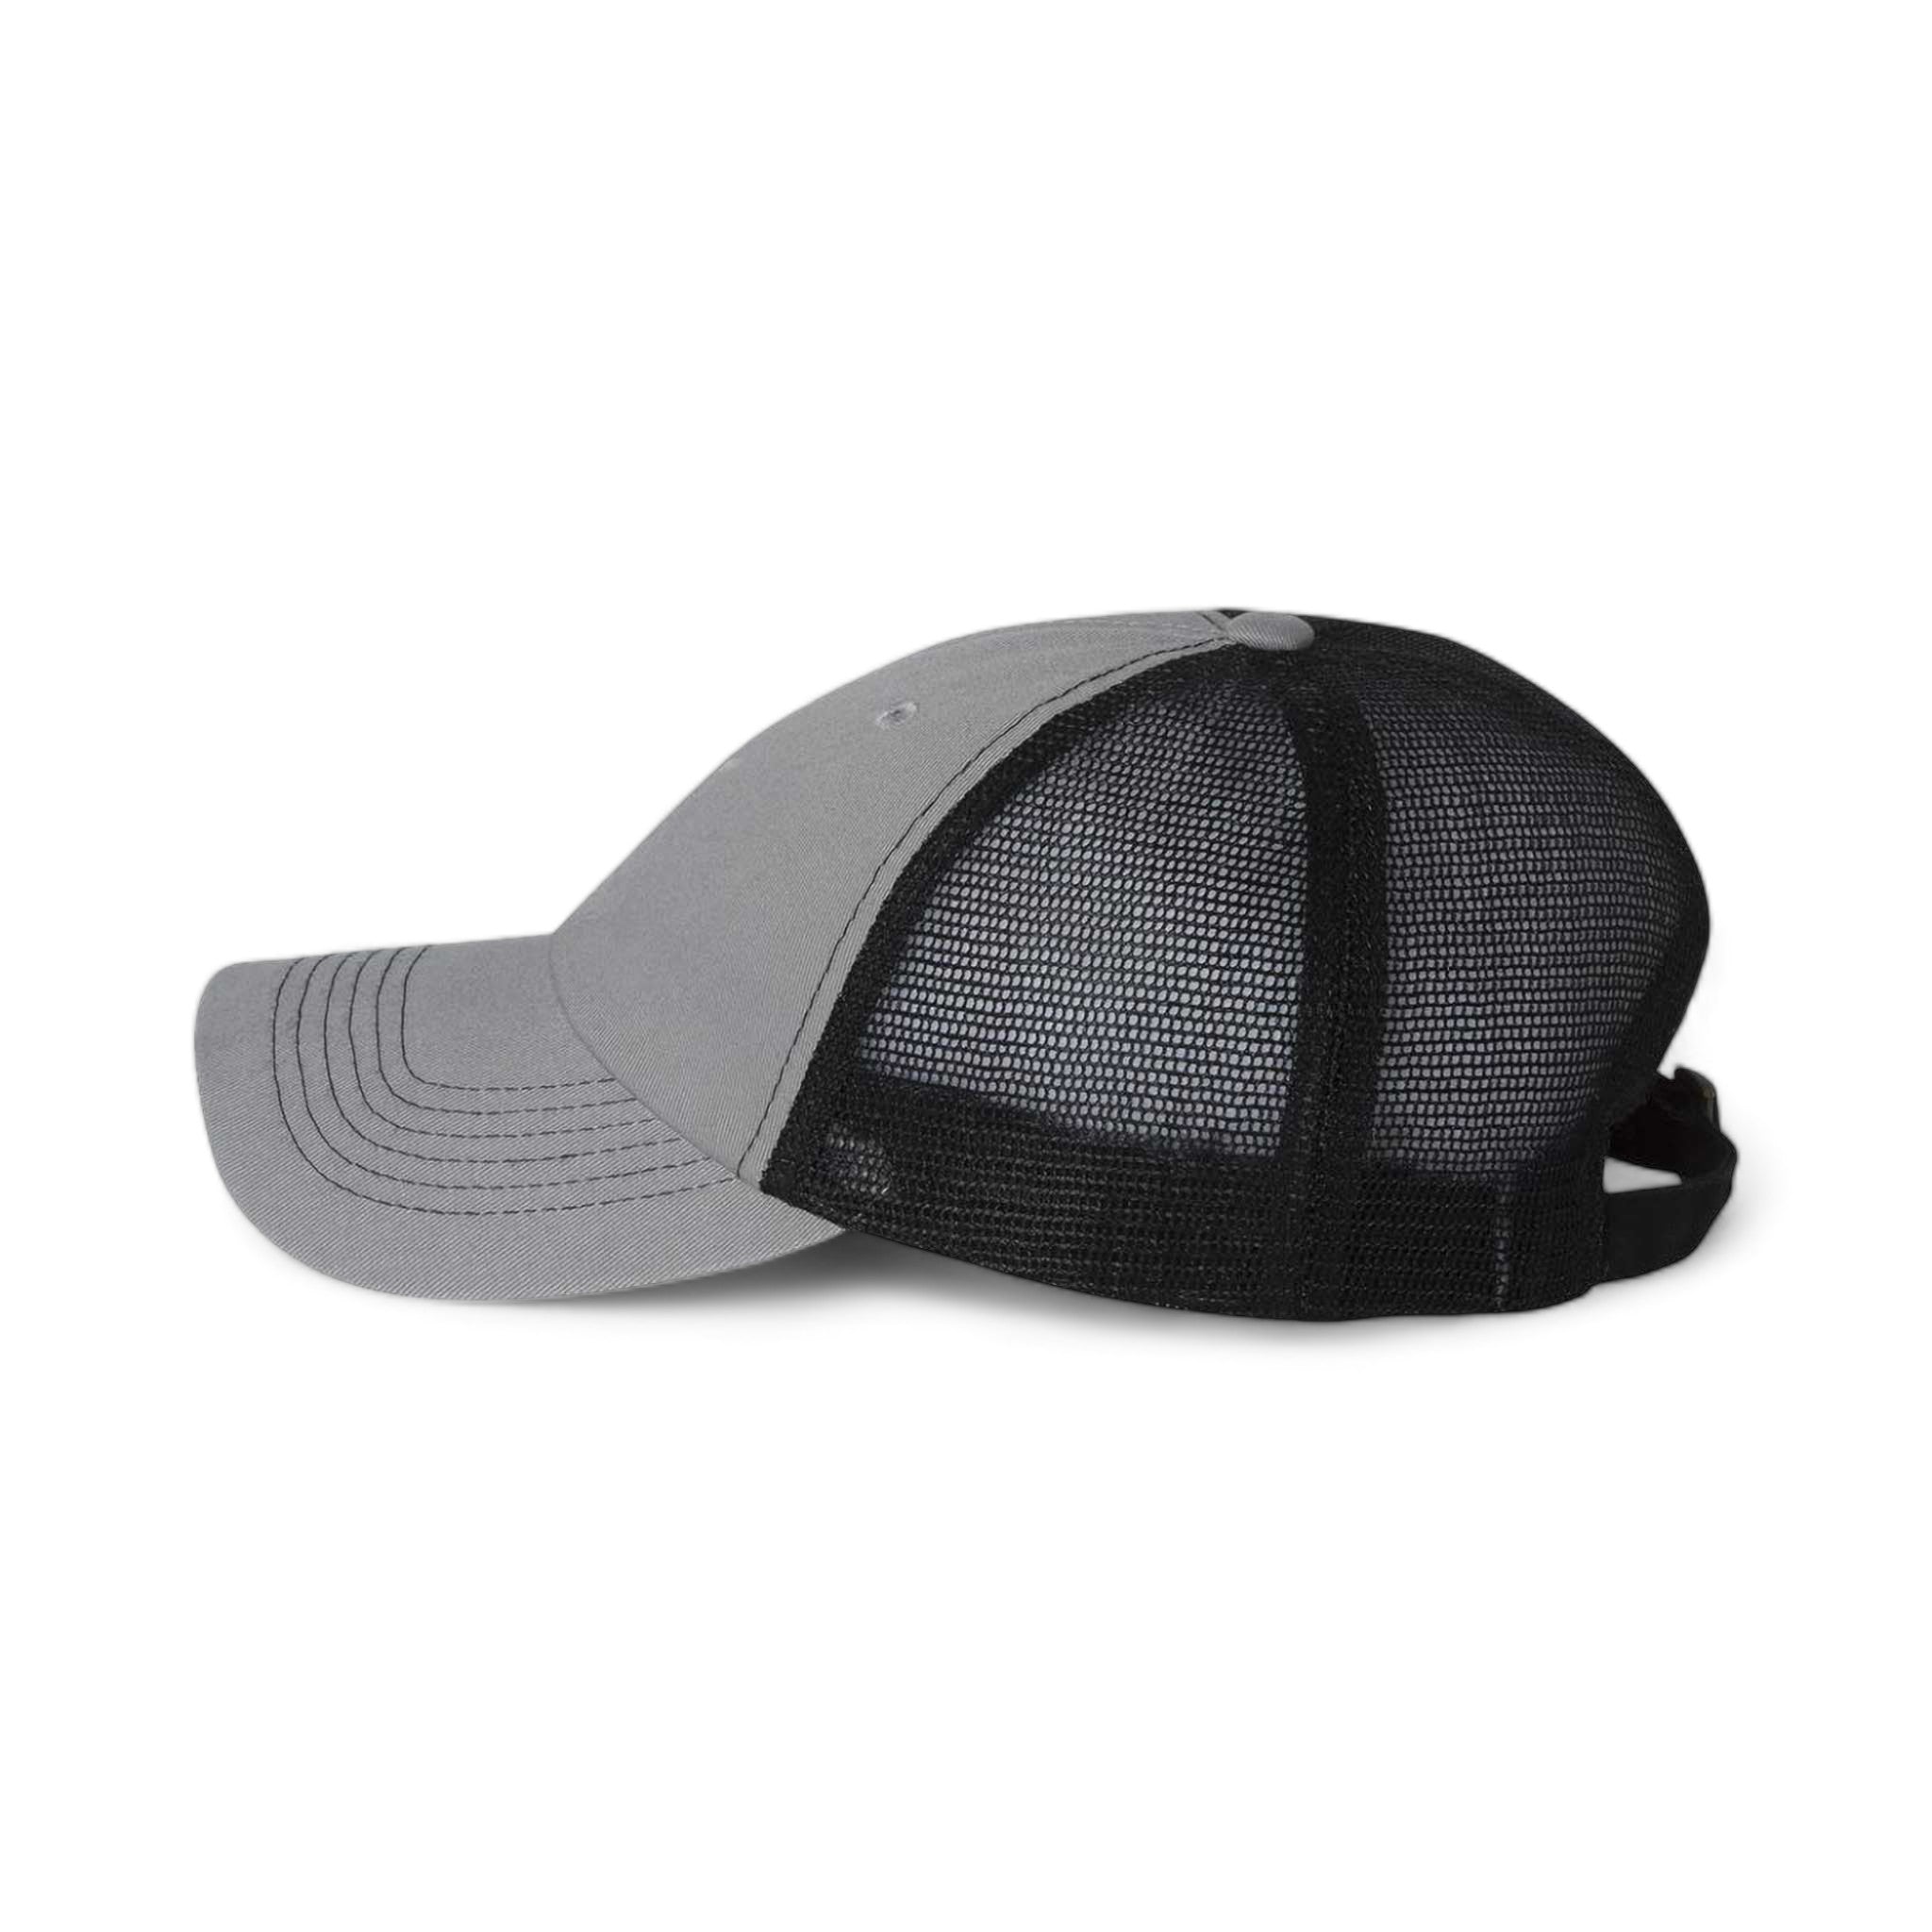 Side view of Sportsman 3100 custom hat in grey and black